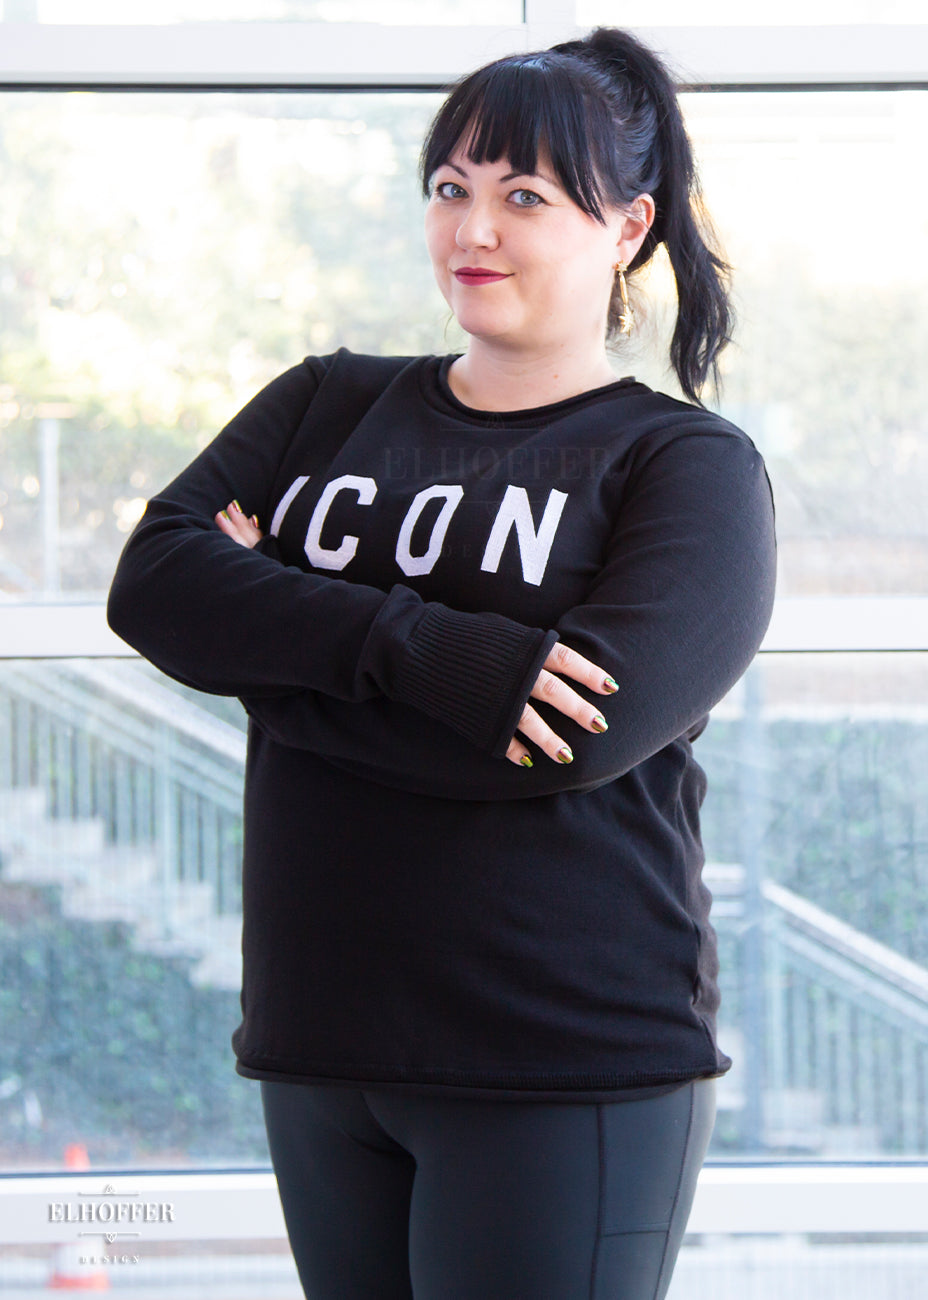 Bernadette, a fair skinned L model with long dark brown hair pulled up in a pony tail and bangs, is wearing an XL sample of black unisex sweater with white bold embroidered letters that spell ICON and has long sleeves with thumbholes. The sweater also has a rolled hem on both the neckline and around the cuffs. The XL sample makes the sweater look like a relaxed fit, she would get her normal L size if she wanted it more fitted.